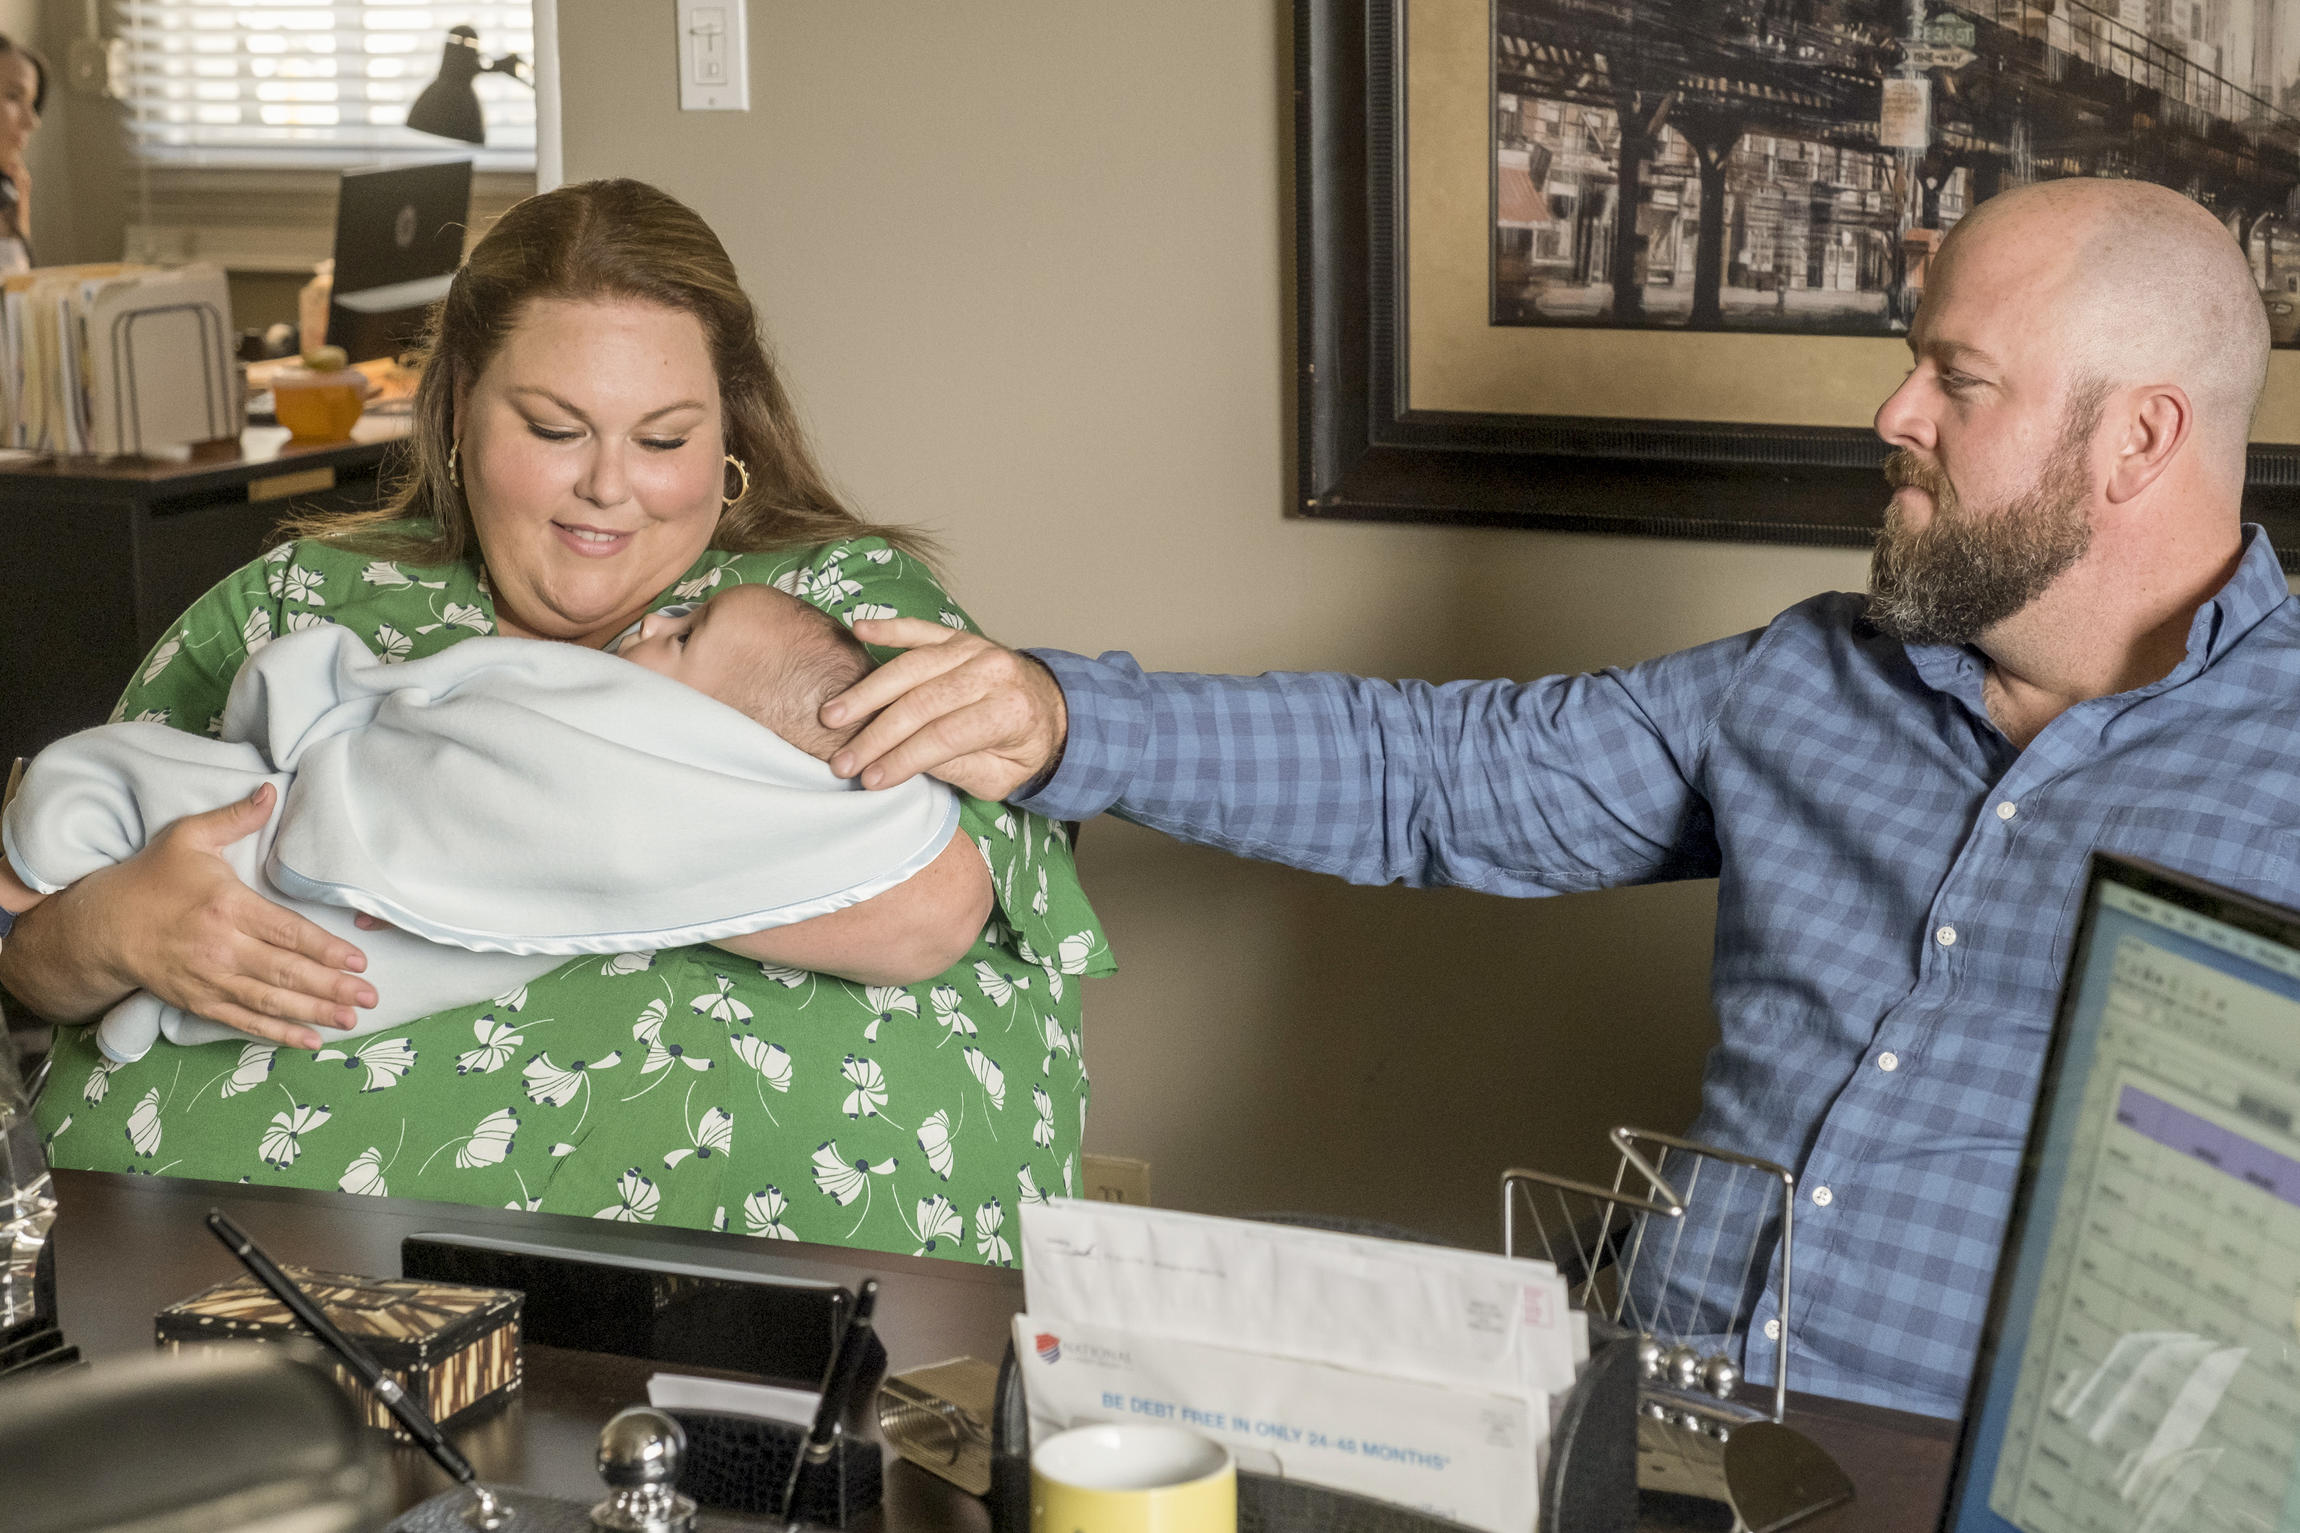 THIS IS US -- " Strangers" Episode 401 -- Pictured: (l-r) Chrissy Metz as Kate, Chriss Sullivan as Toby -- (Photo by: Ron Batzdorff/NBC)